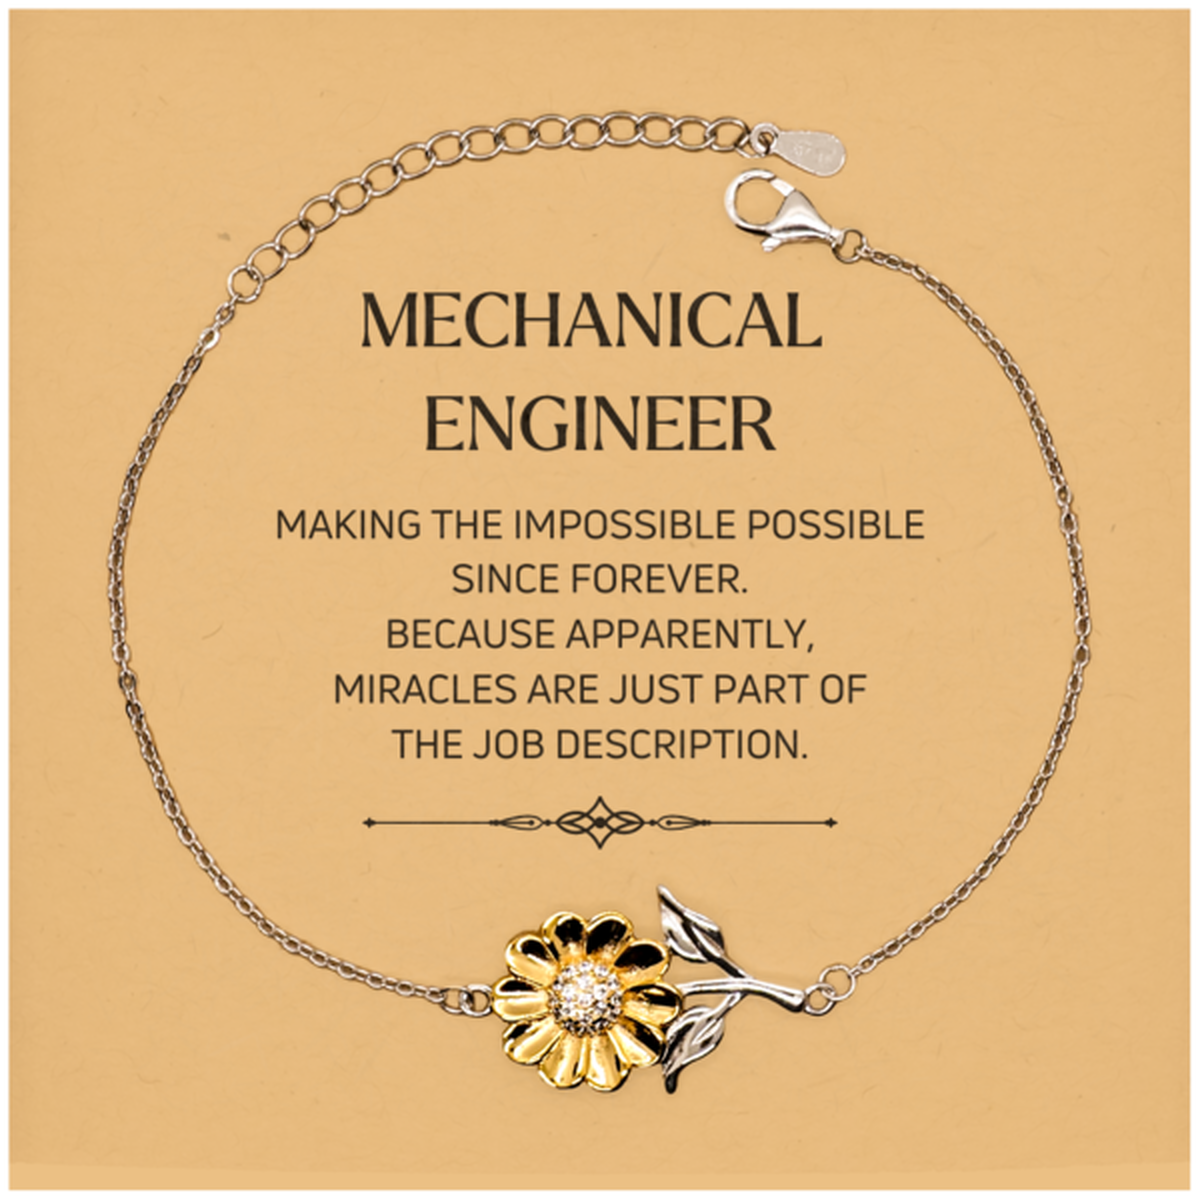 Funny Mechanical Engineer Gifts, Miracles are just part of the job description, Inspirational Birthday Christmas Sunflower Bracelet For Mechanical Engineer, Men, Women, Coworkers, Friends, Boss